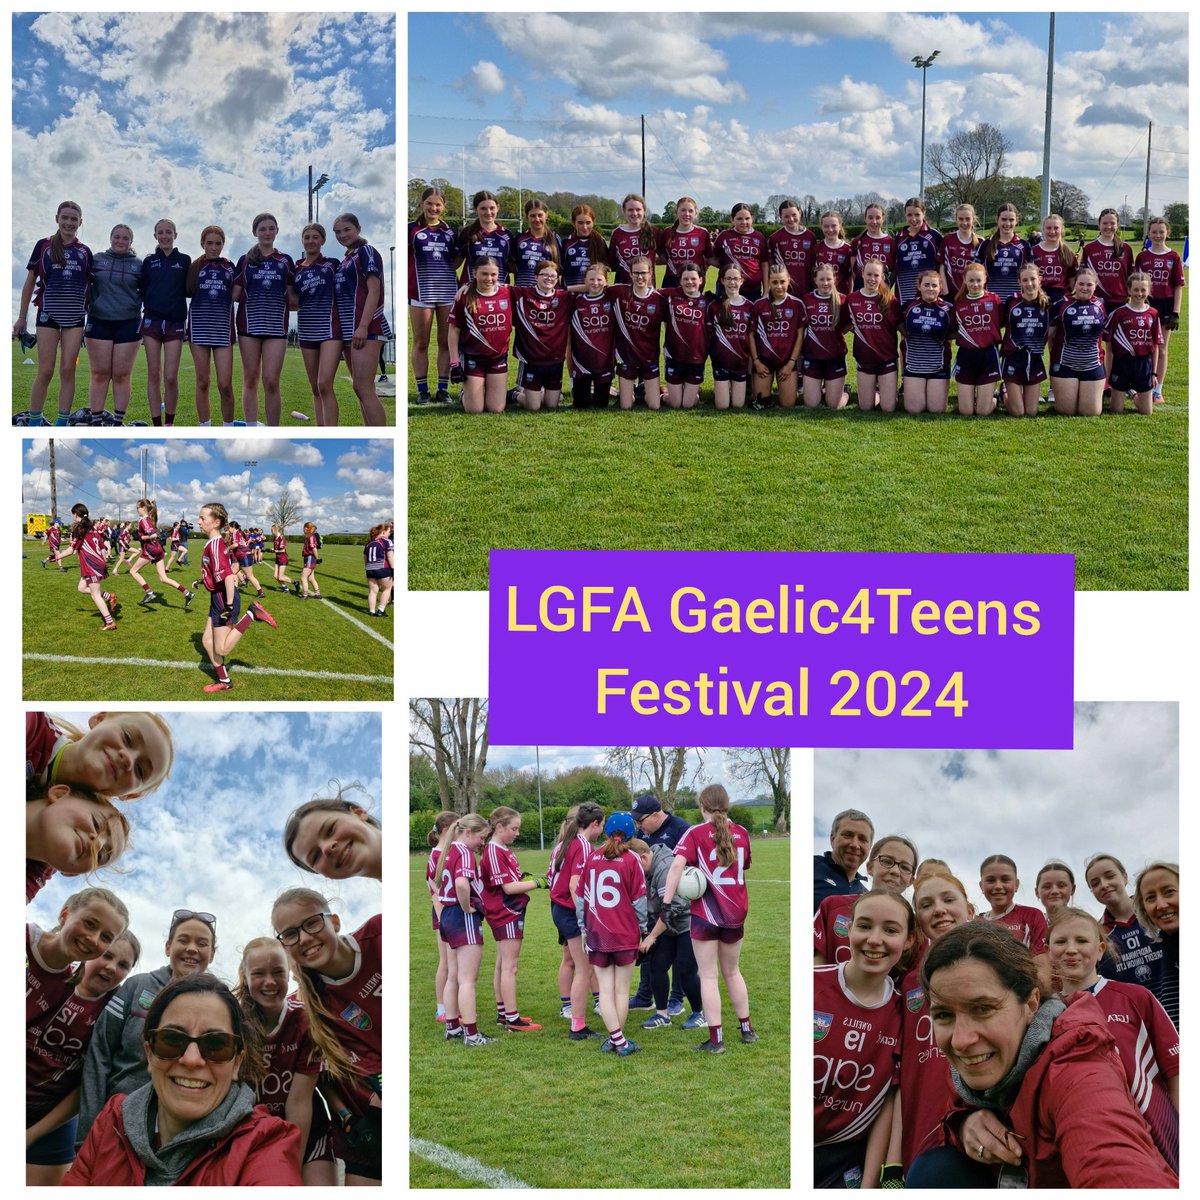 Super day in Faithful Fields today for Zucar #Gaelic4Teens Festival. Well done to @ArdfinnanLGFA girls and thanks to @LadiesFootball for arranging a great day out...